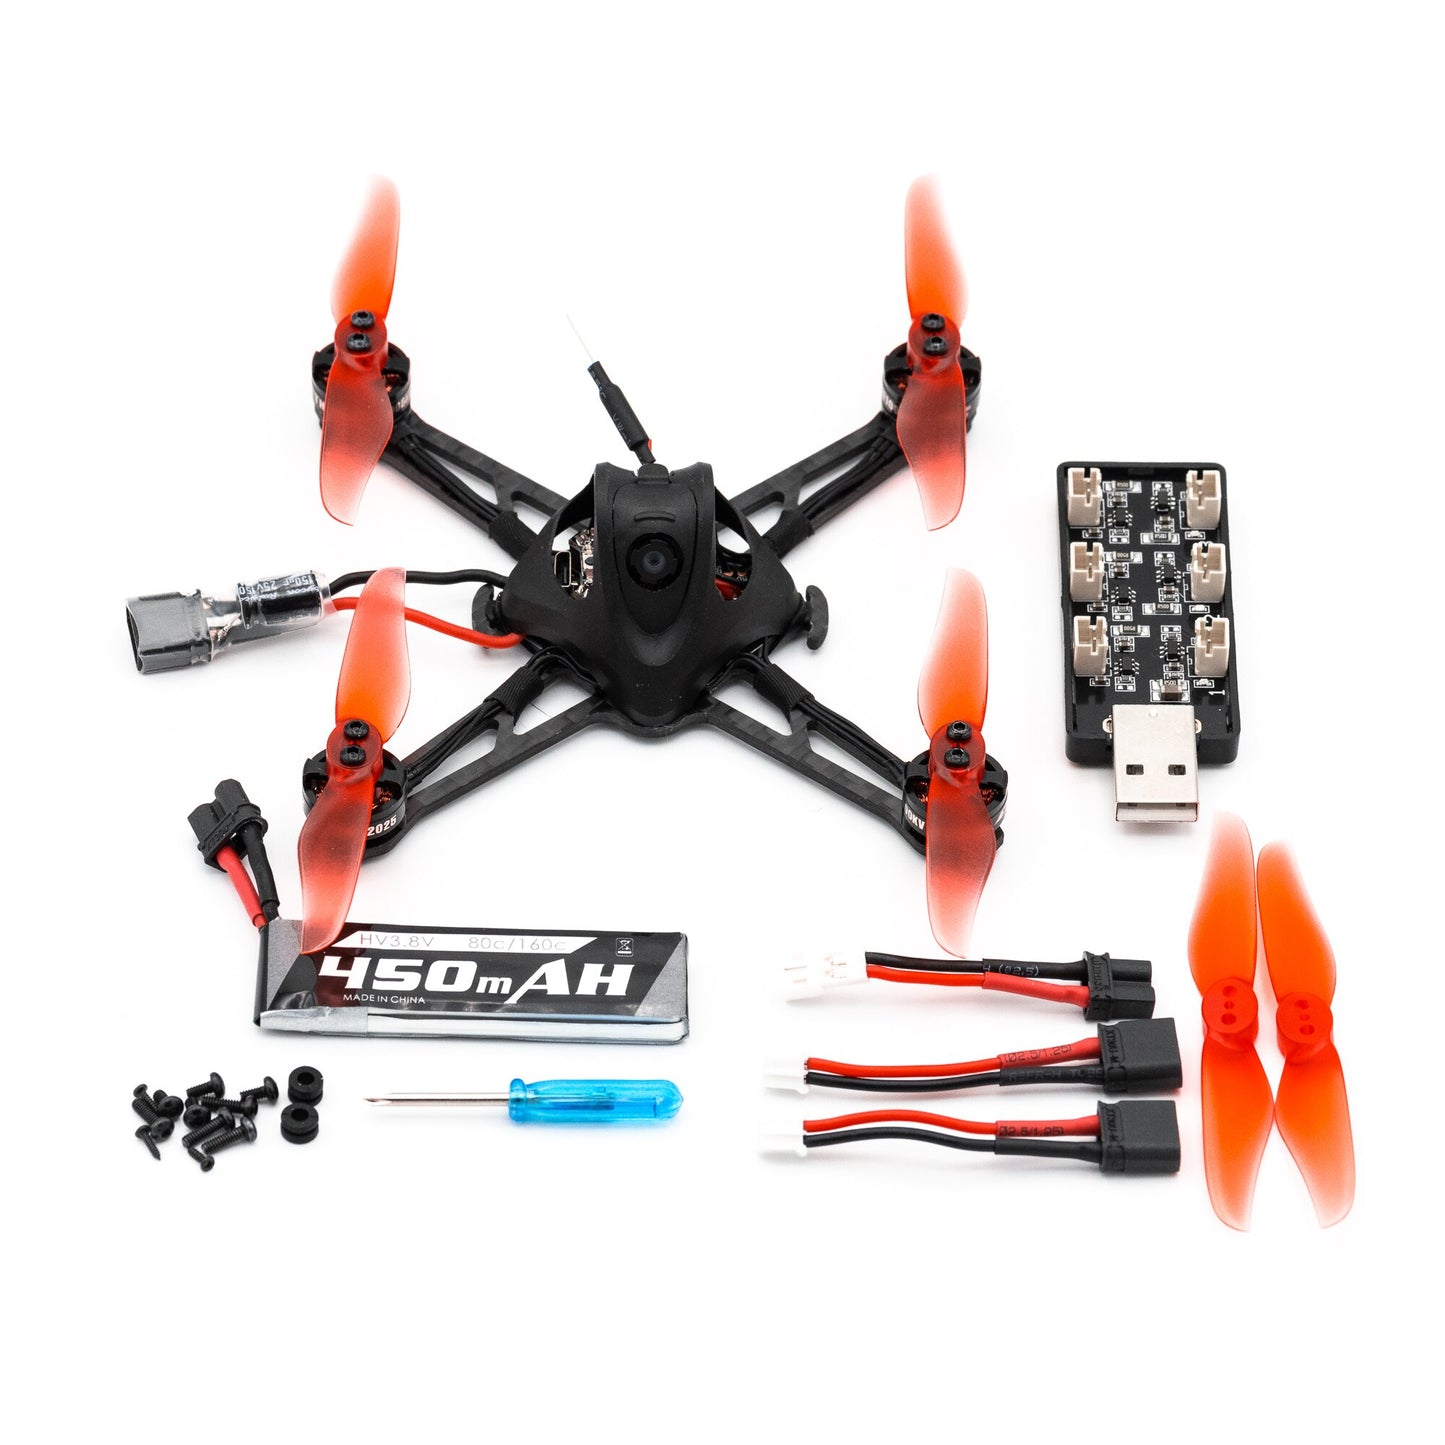 EMAX Nanohawk X - F4 1S 3 Inch BNF Lightweight 41g  Outdoor FPV Racing Drone TH12025 11000KV Motor RC Airplane Quadcopter